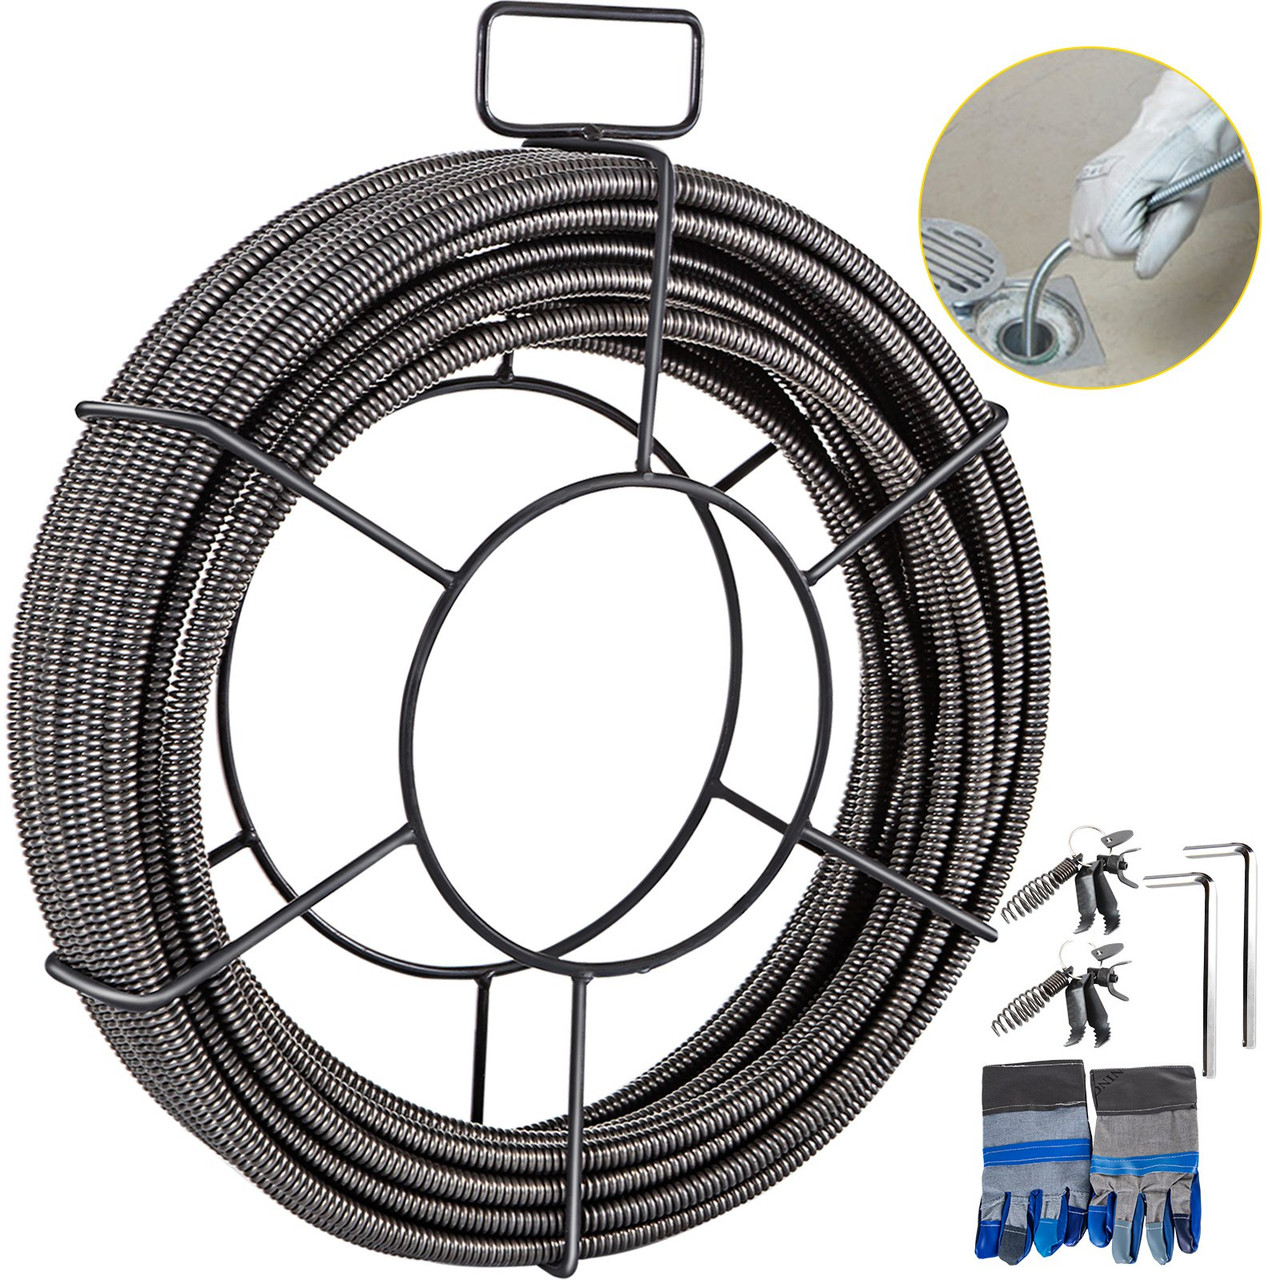 Drain Cleaning Cable 100 Feet x 3/8 Inch Solid Core Cable Sewer Cable Drain Auger Cable Cleaner Snake Clog Pipe Drain Cleaning Cable Sewer Drain Auger Snake Pipe